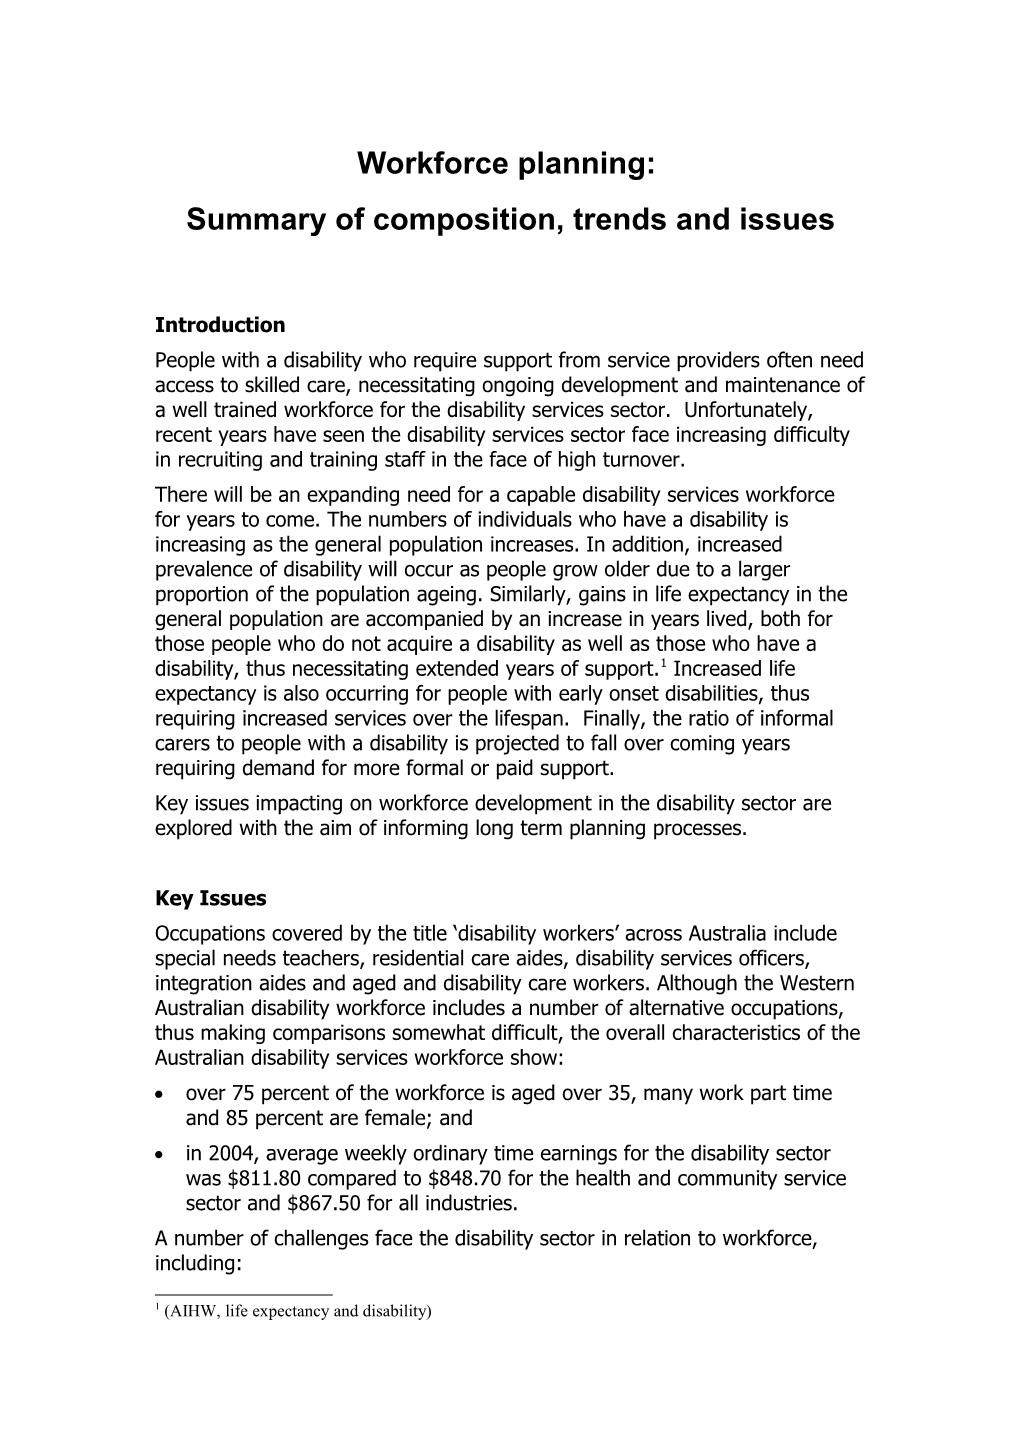 Workforce Planning: Summary of Composition, Trends and Issues